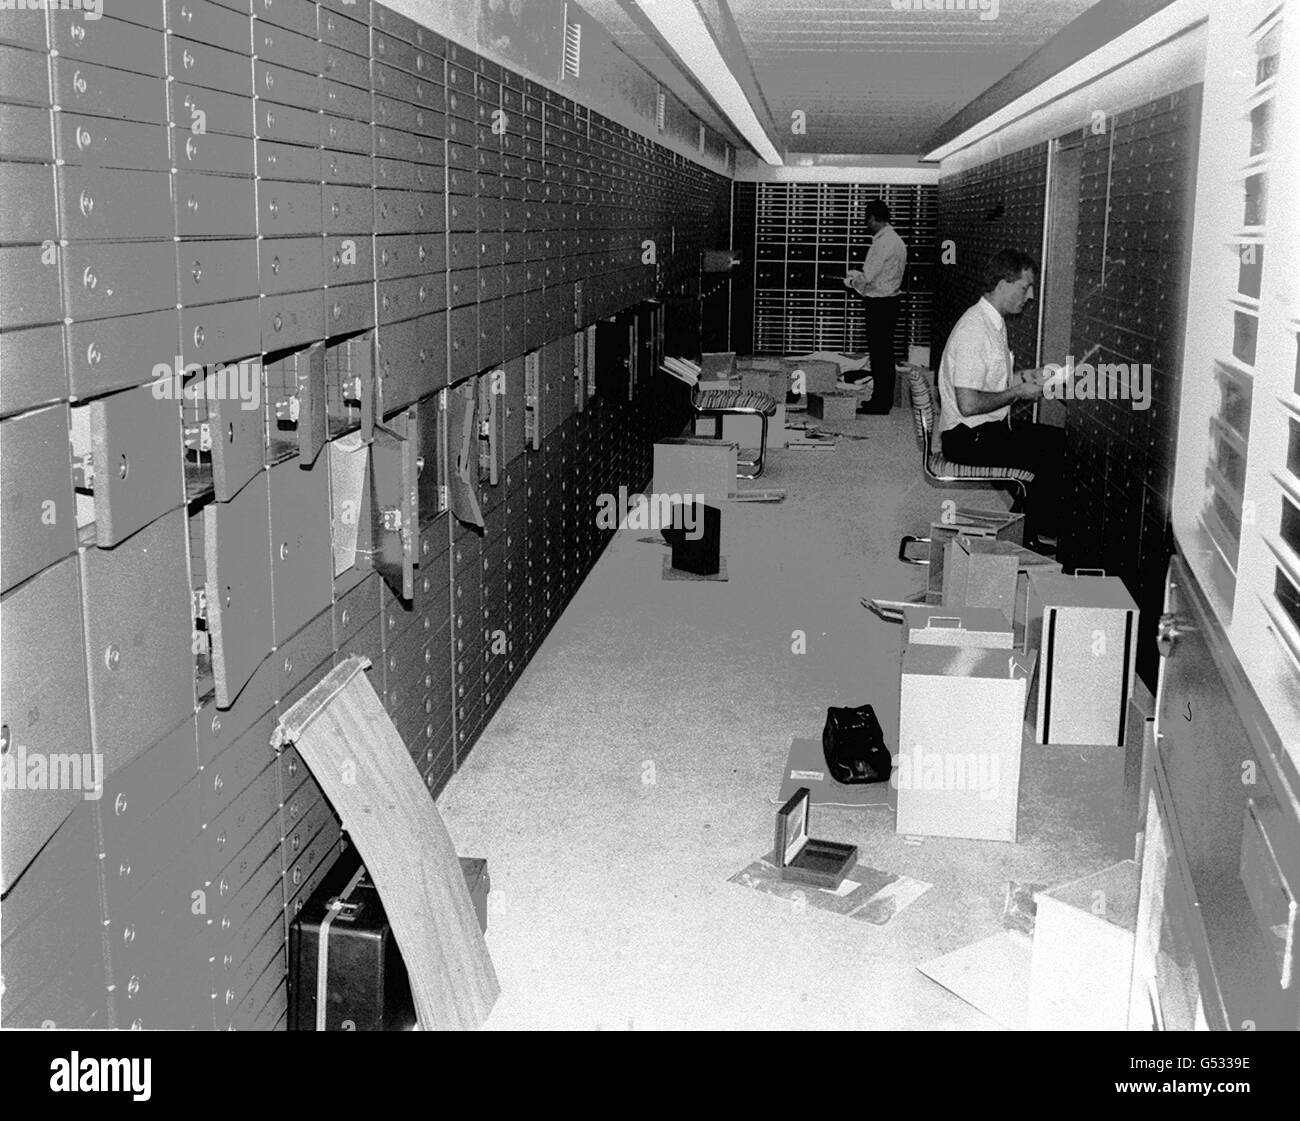 Police officers check the raided boxes in the vault of the Knightsbridge Safe Deposit Centre in London following the 40 million robbery. Stock Photo